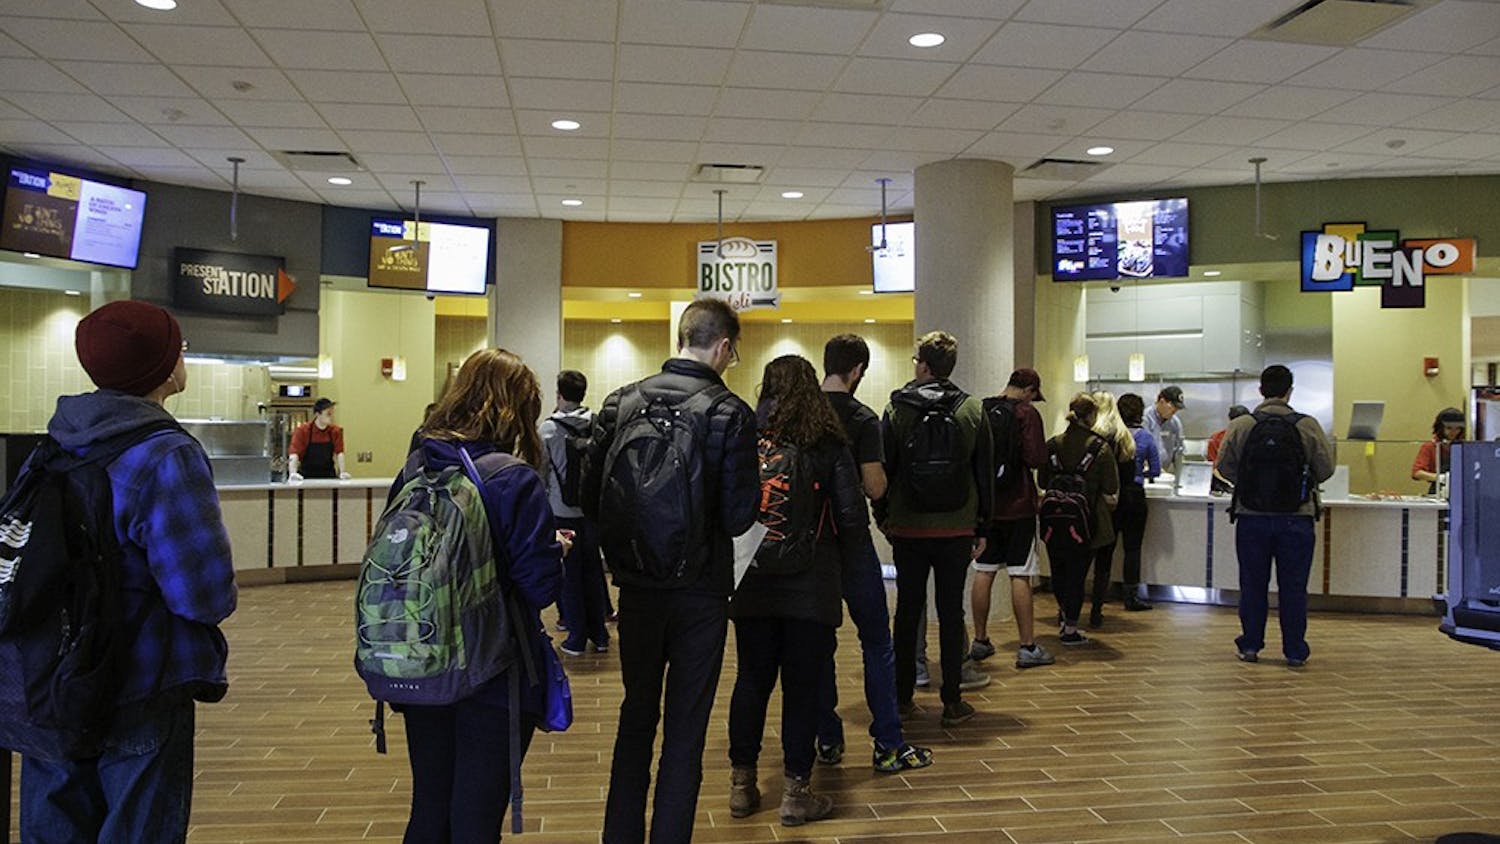 Students wait in line to order from the El Bistro cafe located in Read Hall. El Bistro is undergoing a renovation as part of Read Hall's multiphase improvement project.